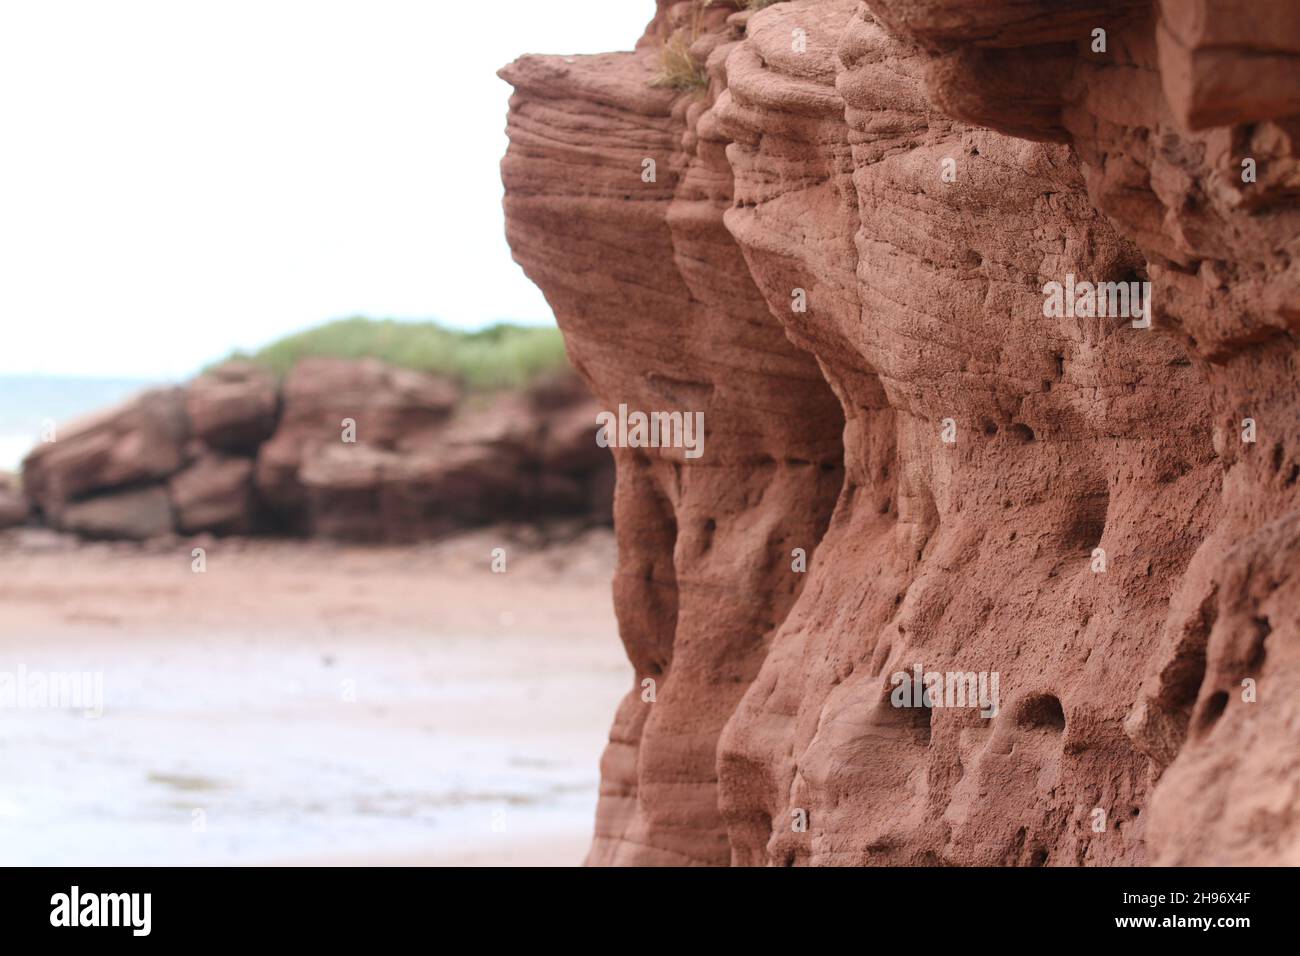 Wind erosion of ruby-red sandstone cliffs and coveted sandy beaches Stock Photo